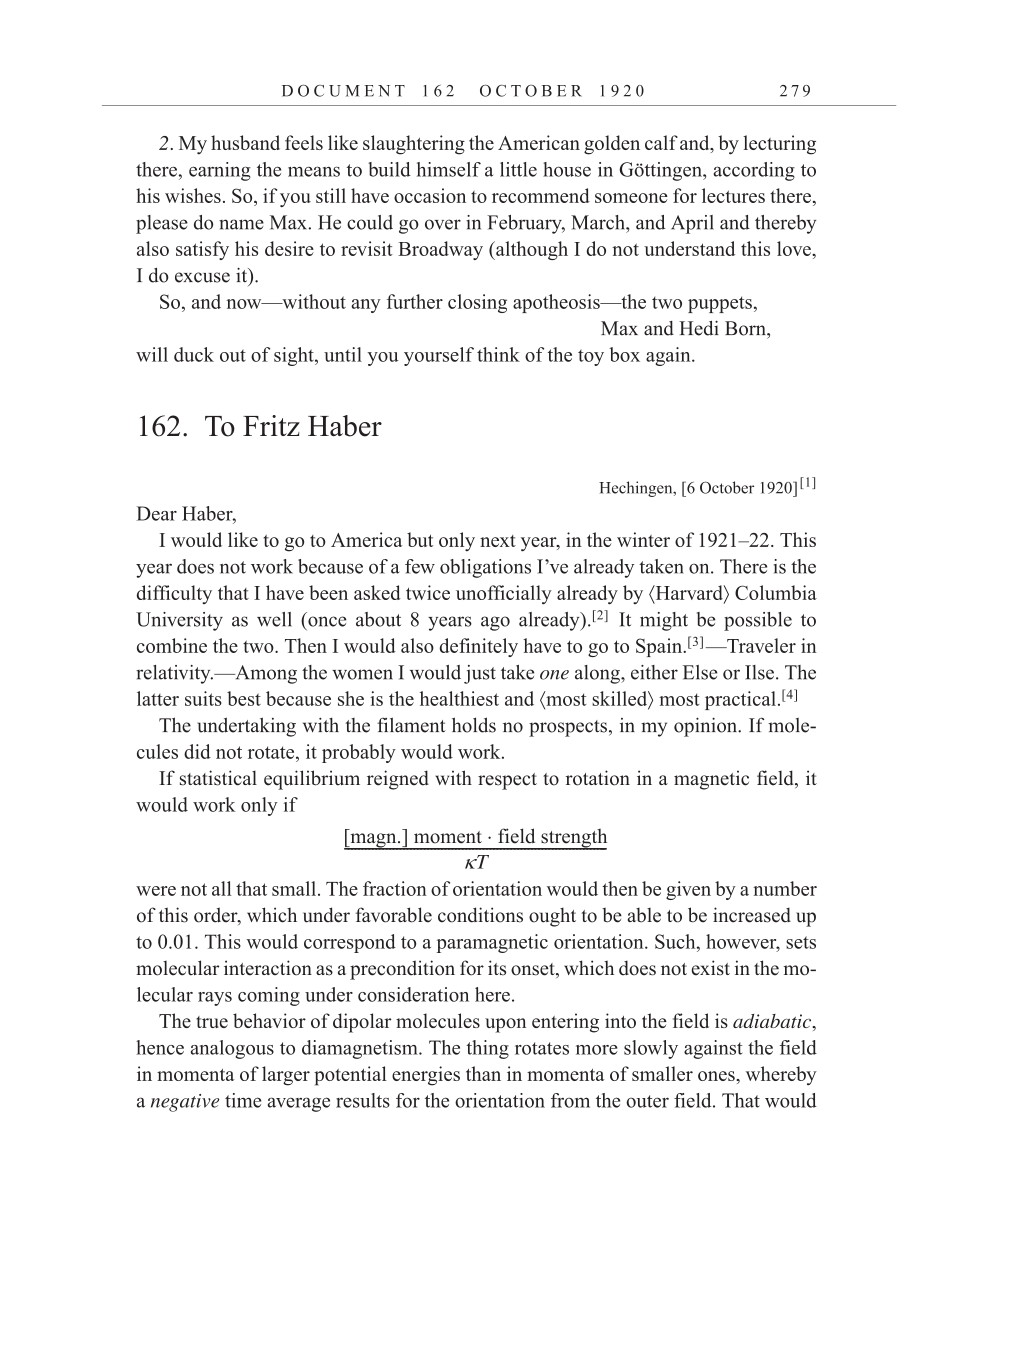 Volume 10: The Berlin Years: Correspondence, May-December 1920, and Supplementary Correspondence, 1909-1920 (English translation supplement) page 279